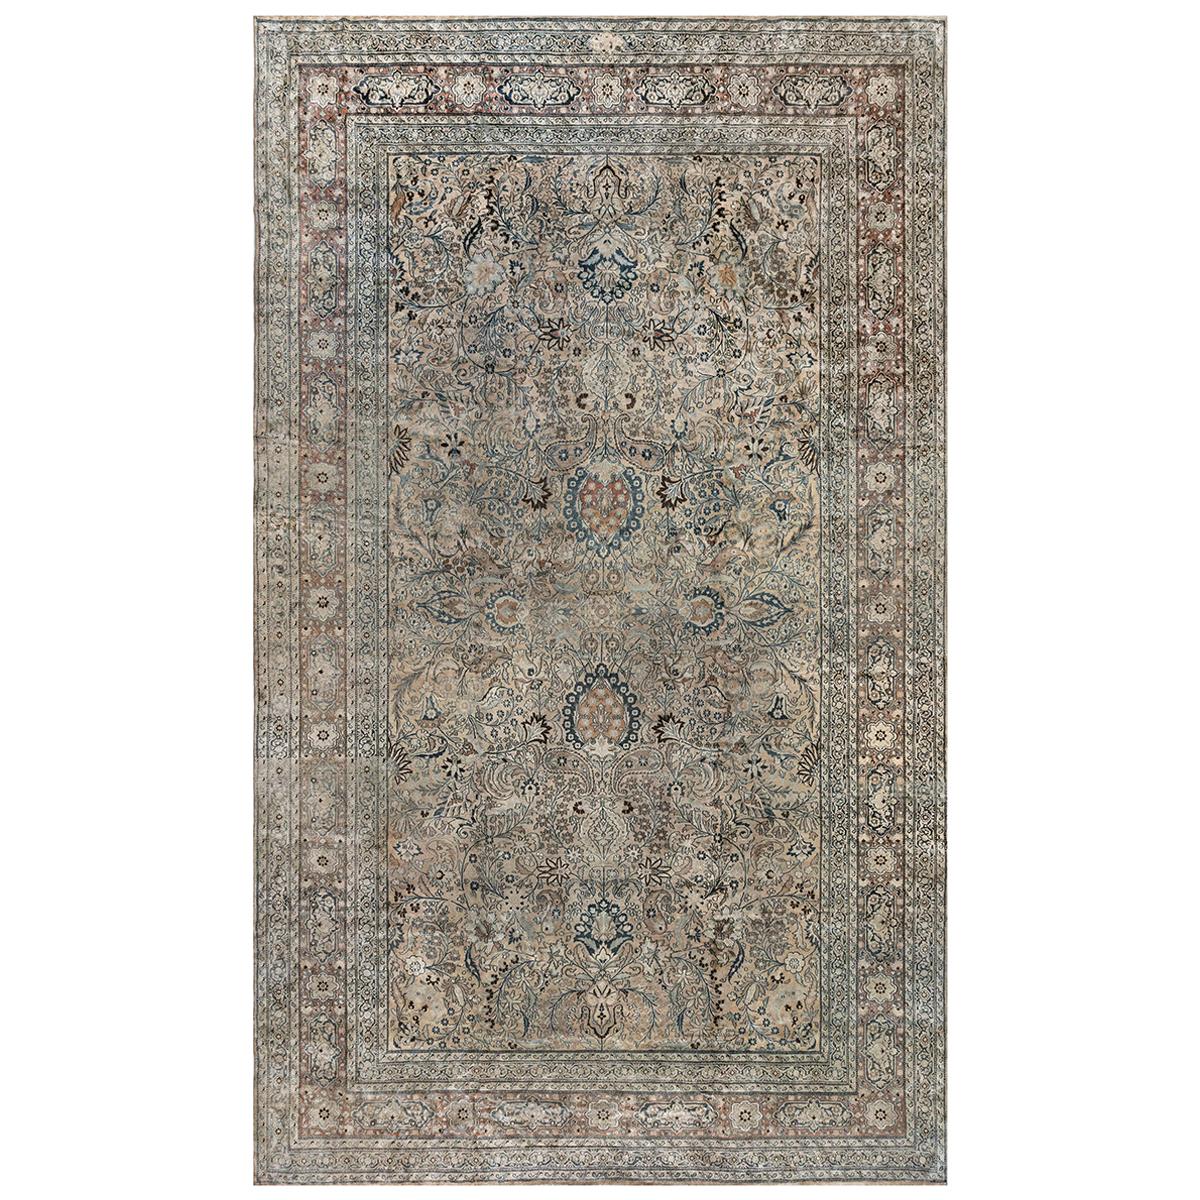 Authentic Early 19th Century Persian Meshad Rug